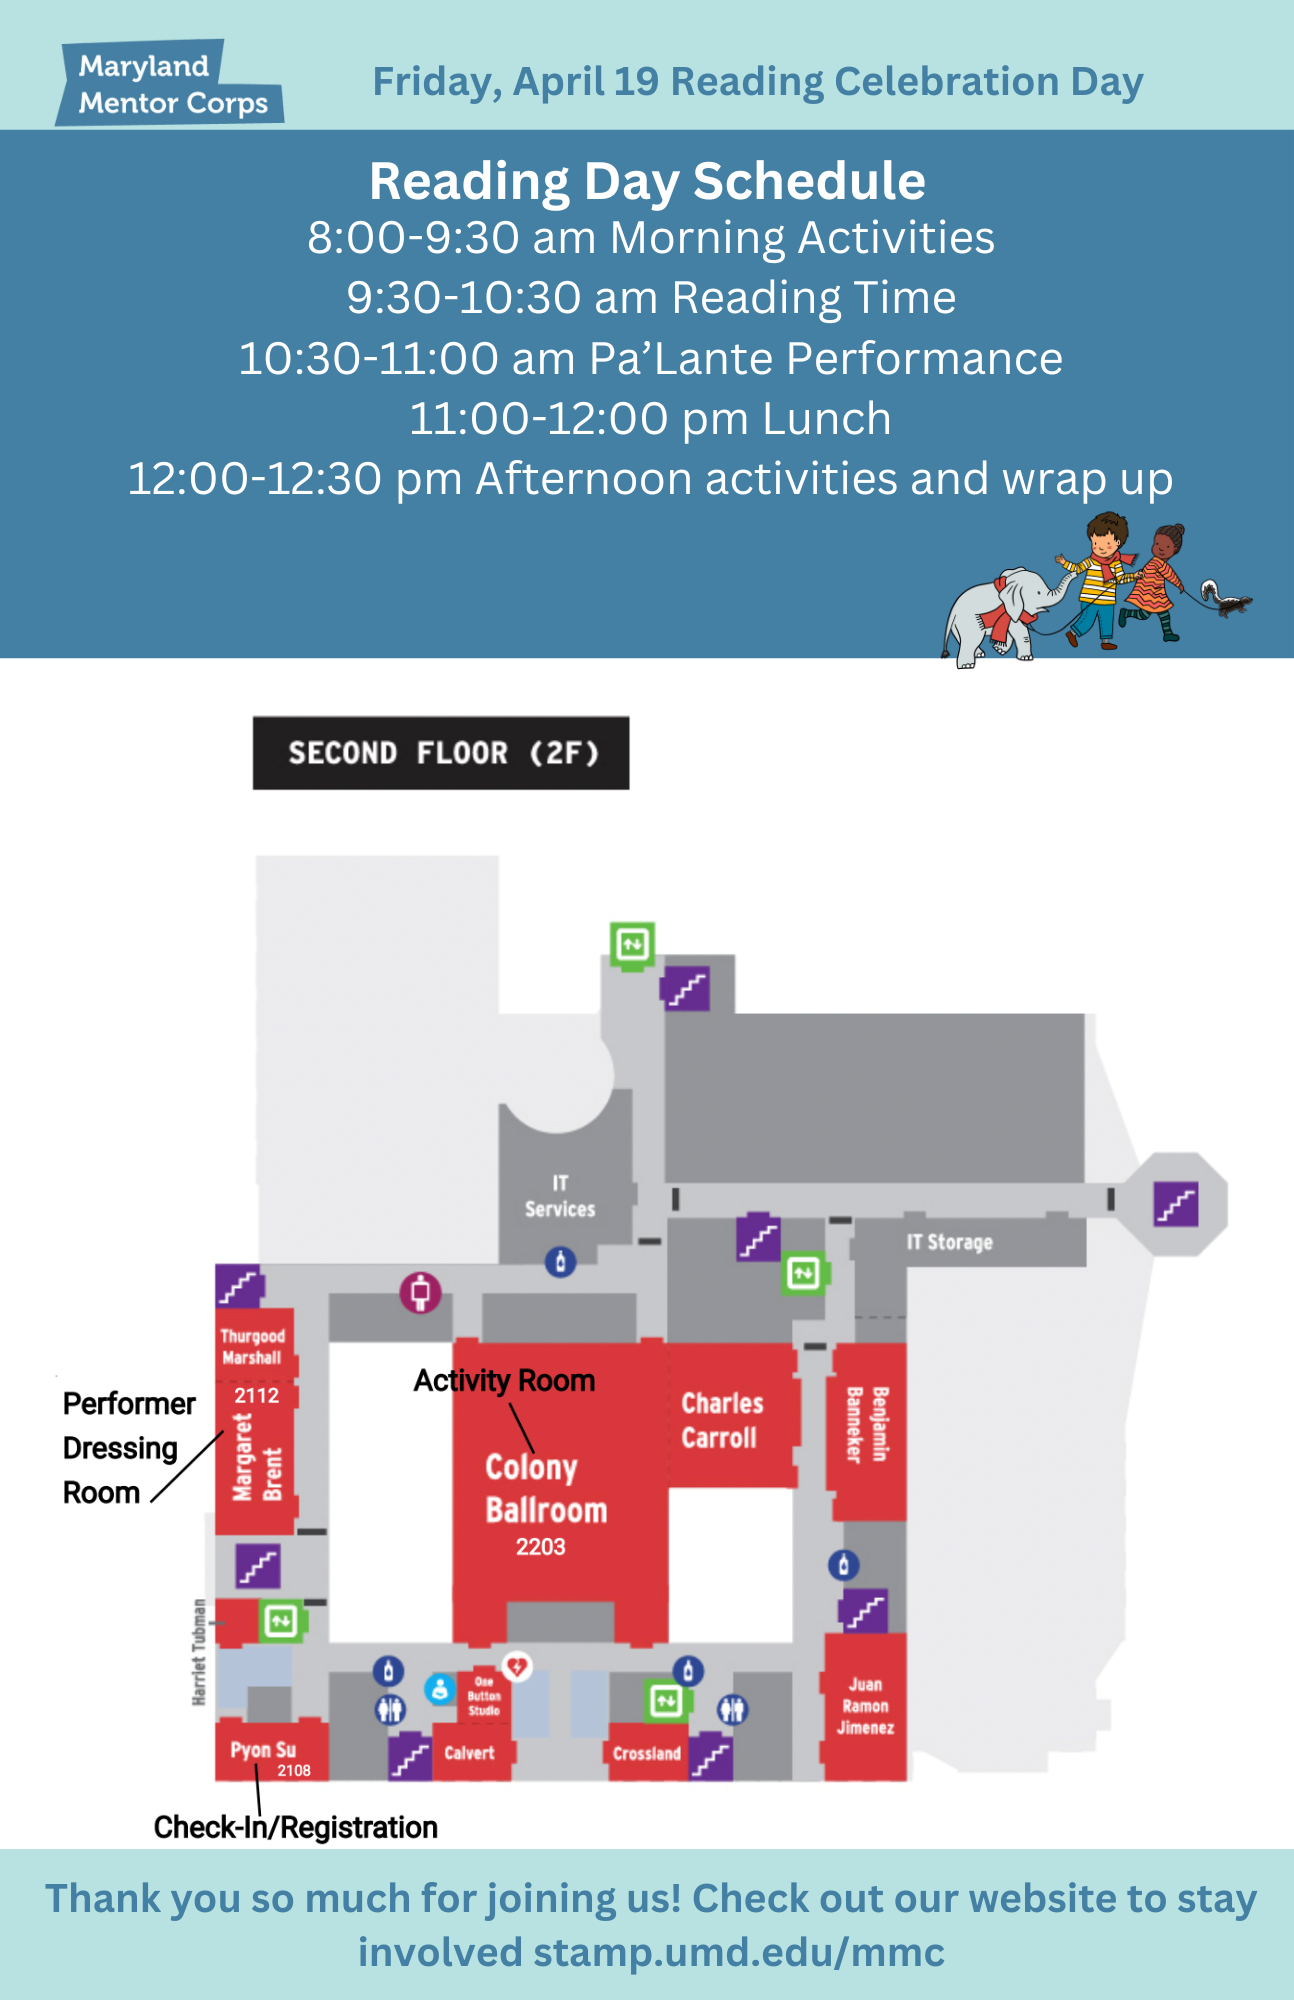 Reading Day Schedule and Map